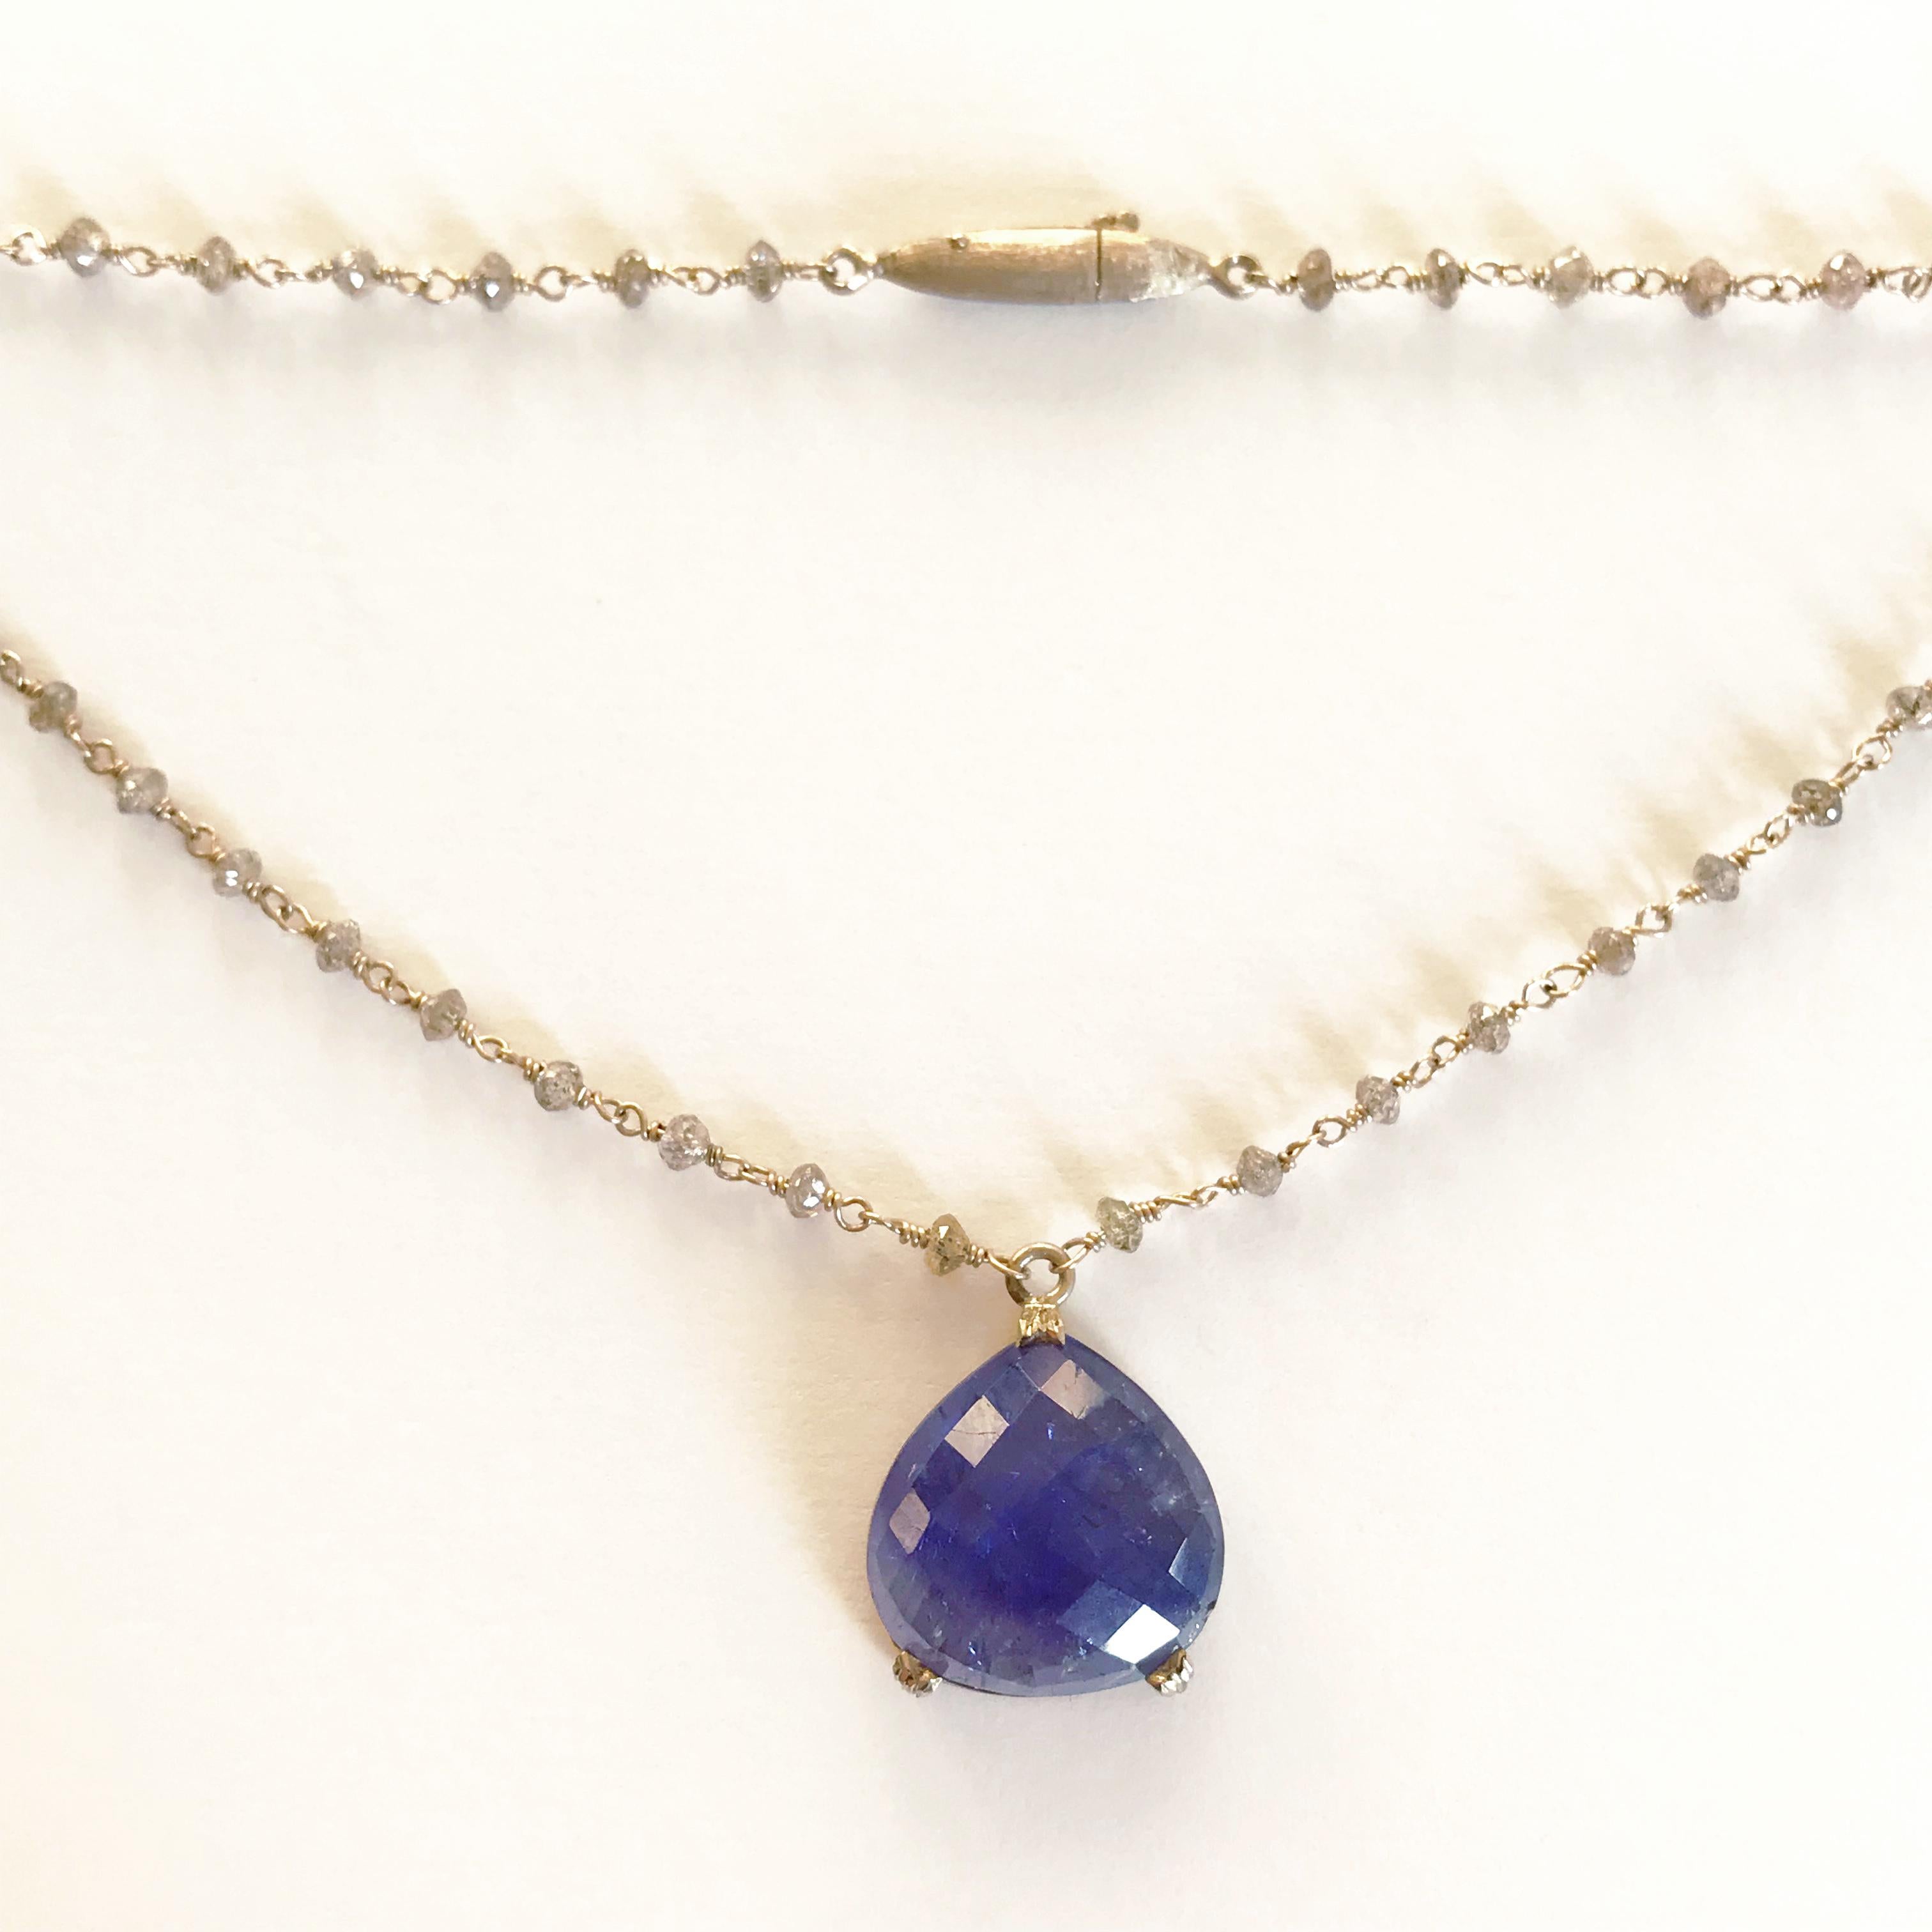 Dalben design hand crafted necklace composed of a drop shape tanzanite mounted on a white gold18k rosary-style chain with faceted light brown diamond beads  spaced at even intervals . 
Brown Diamond beads dimension: 2,3 mm tot weight ct. 5,2
Pendent